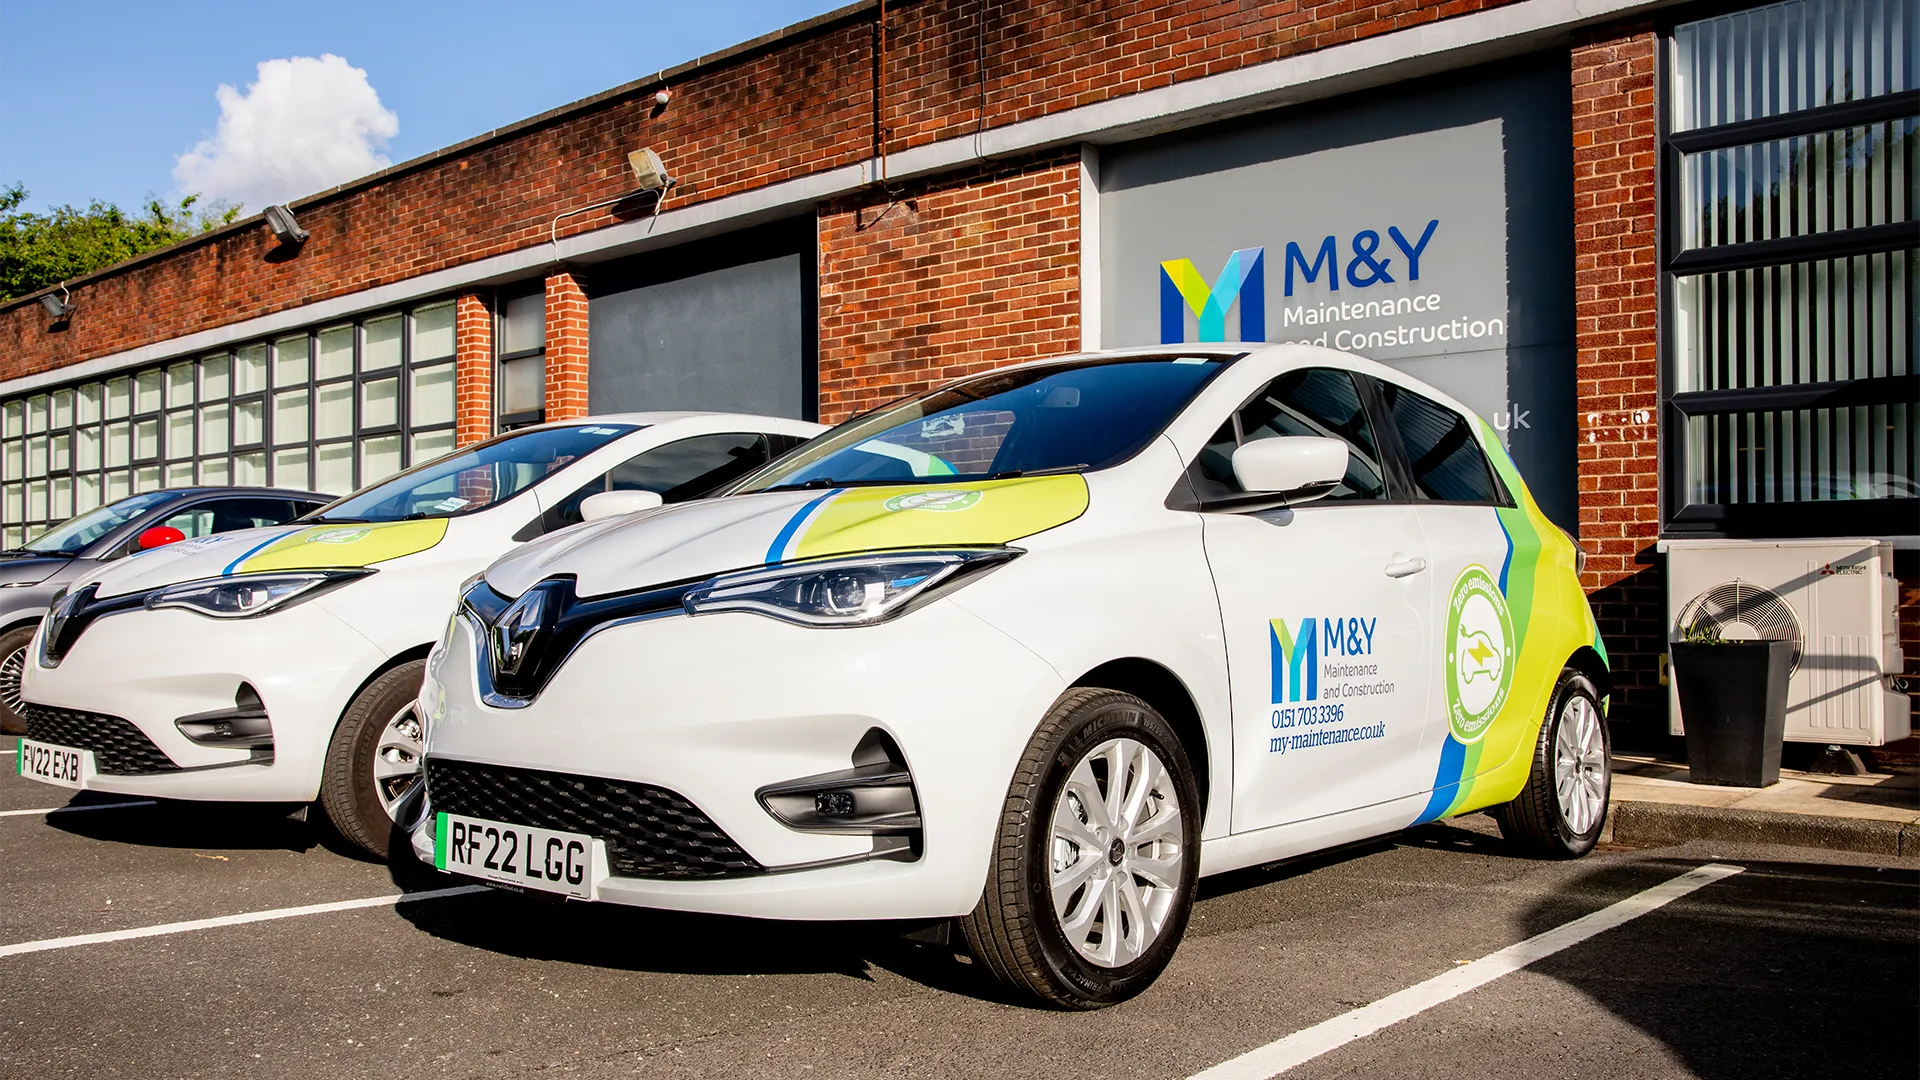 M&y's electric vehicles